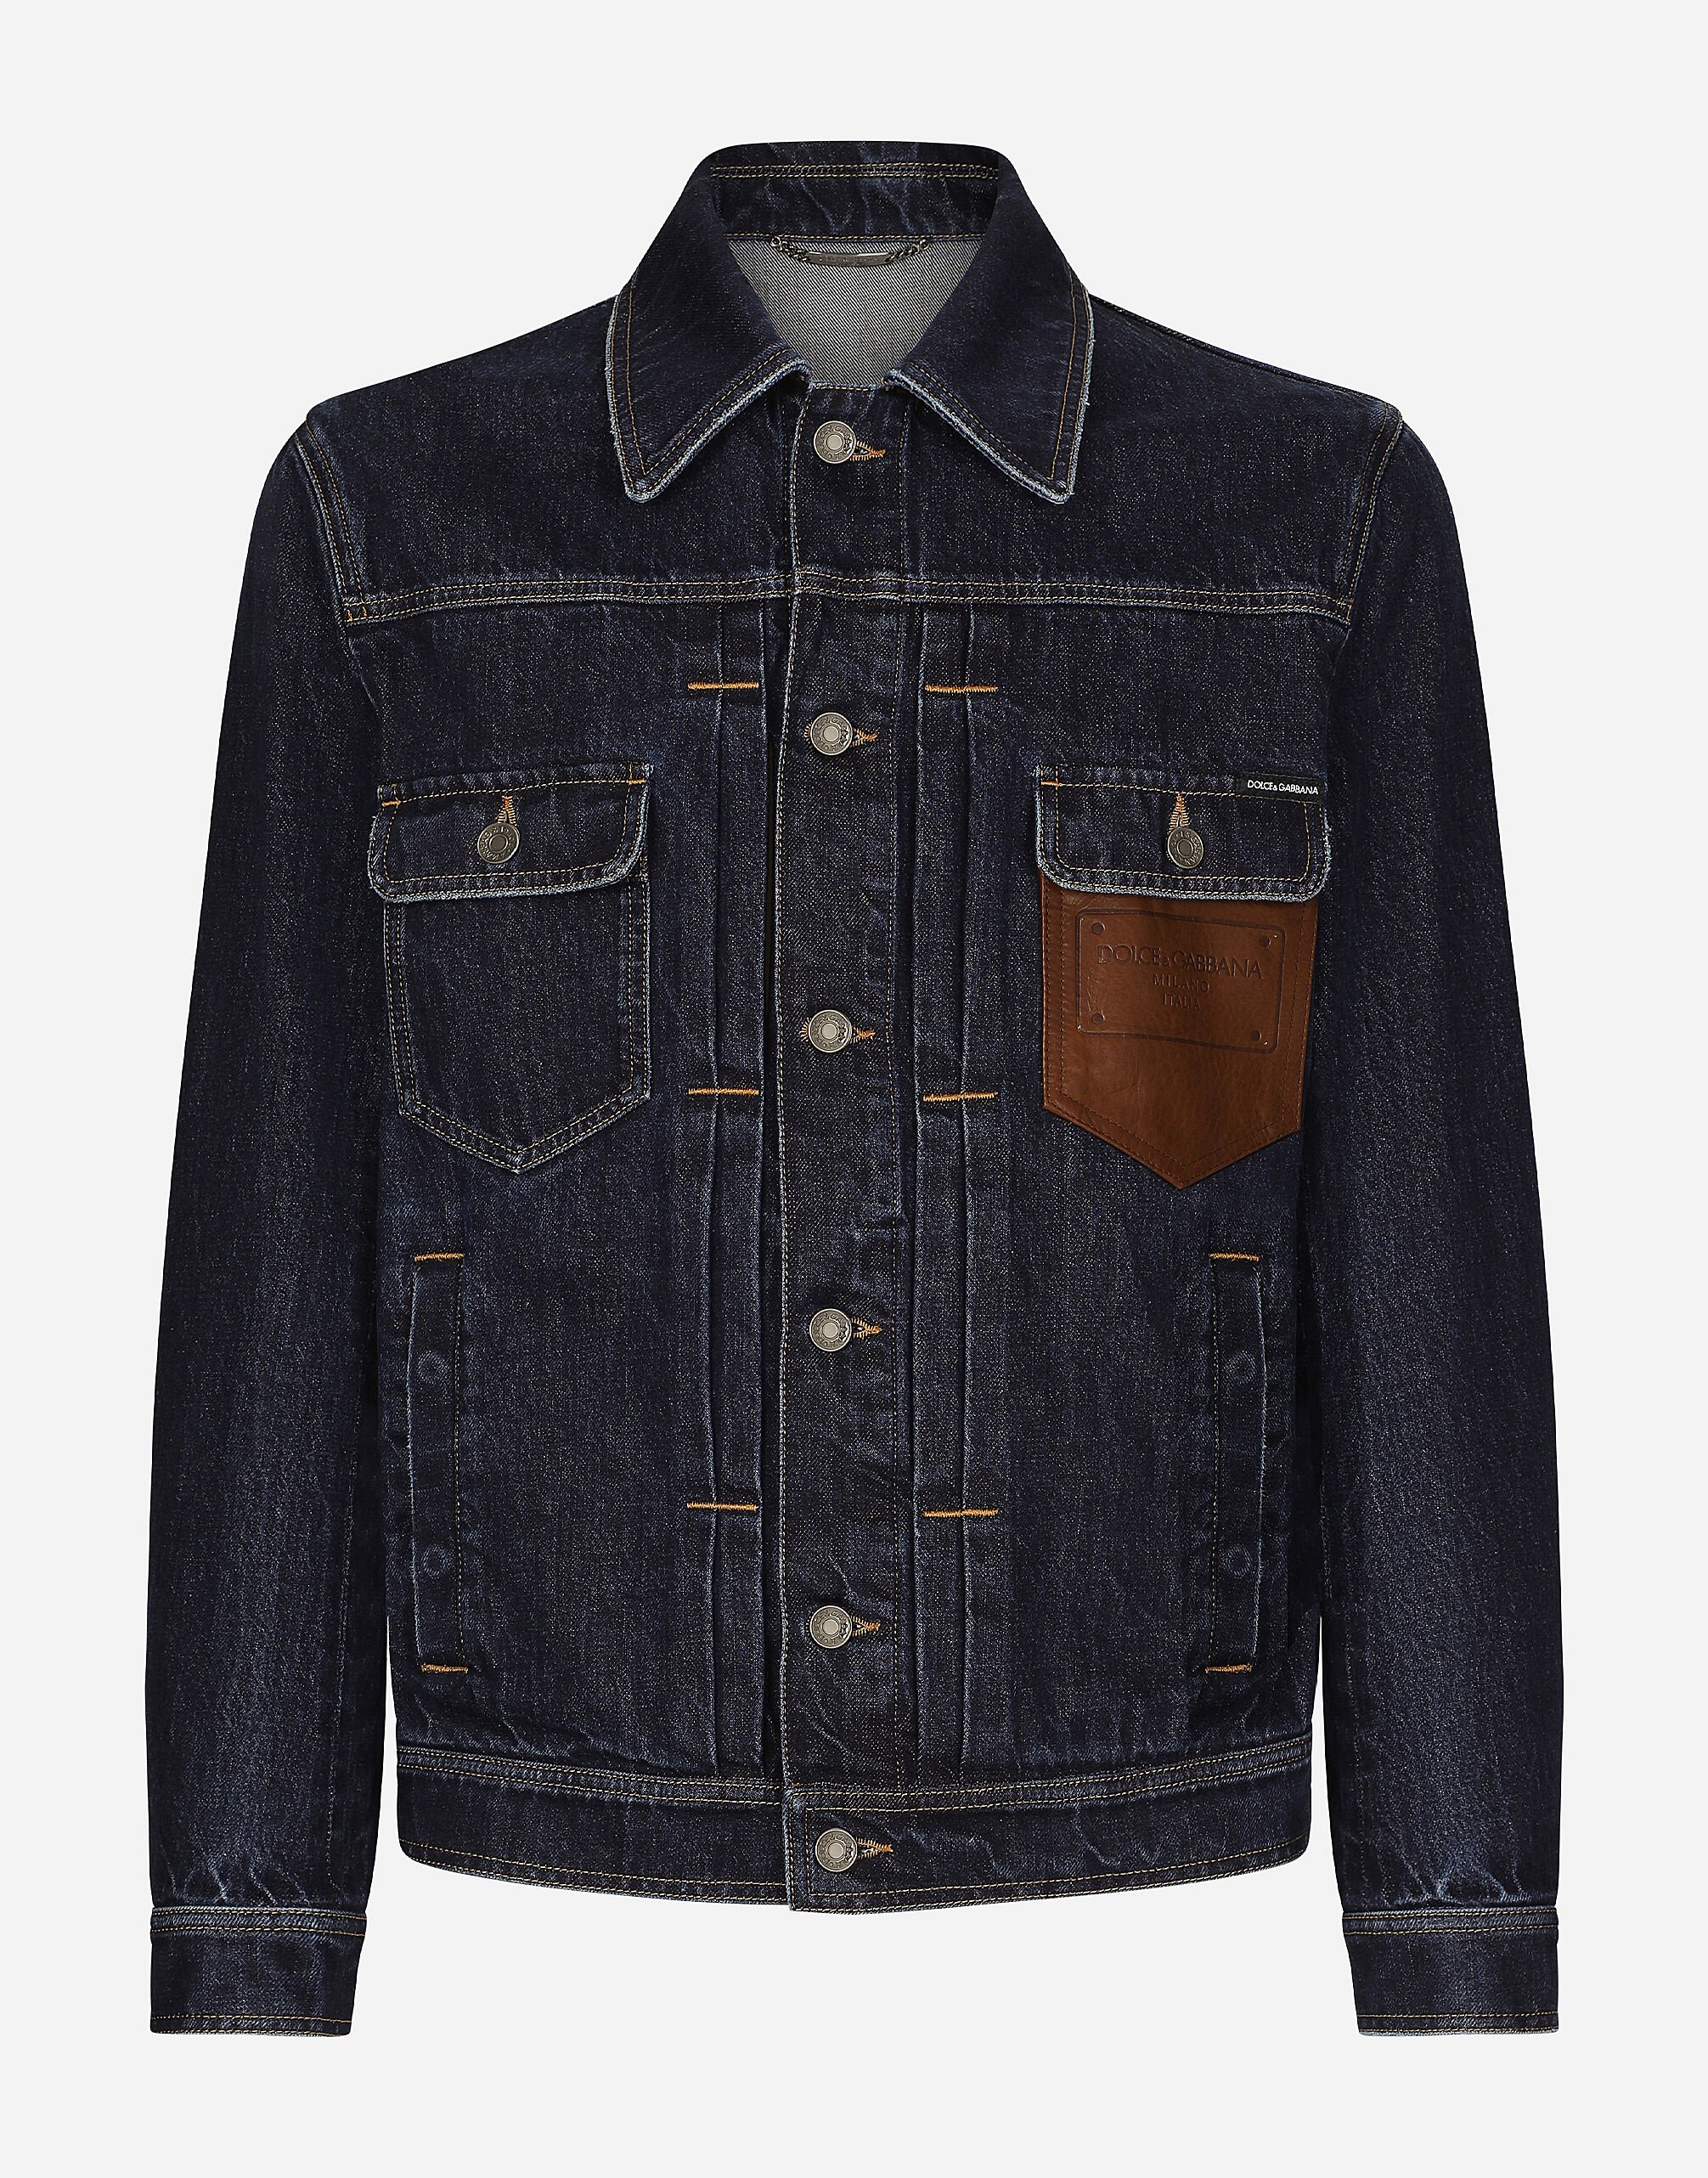 Dolce & Gabbana Denim jacket with embossed tag on leather Print G9AZDTFS6N5